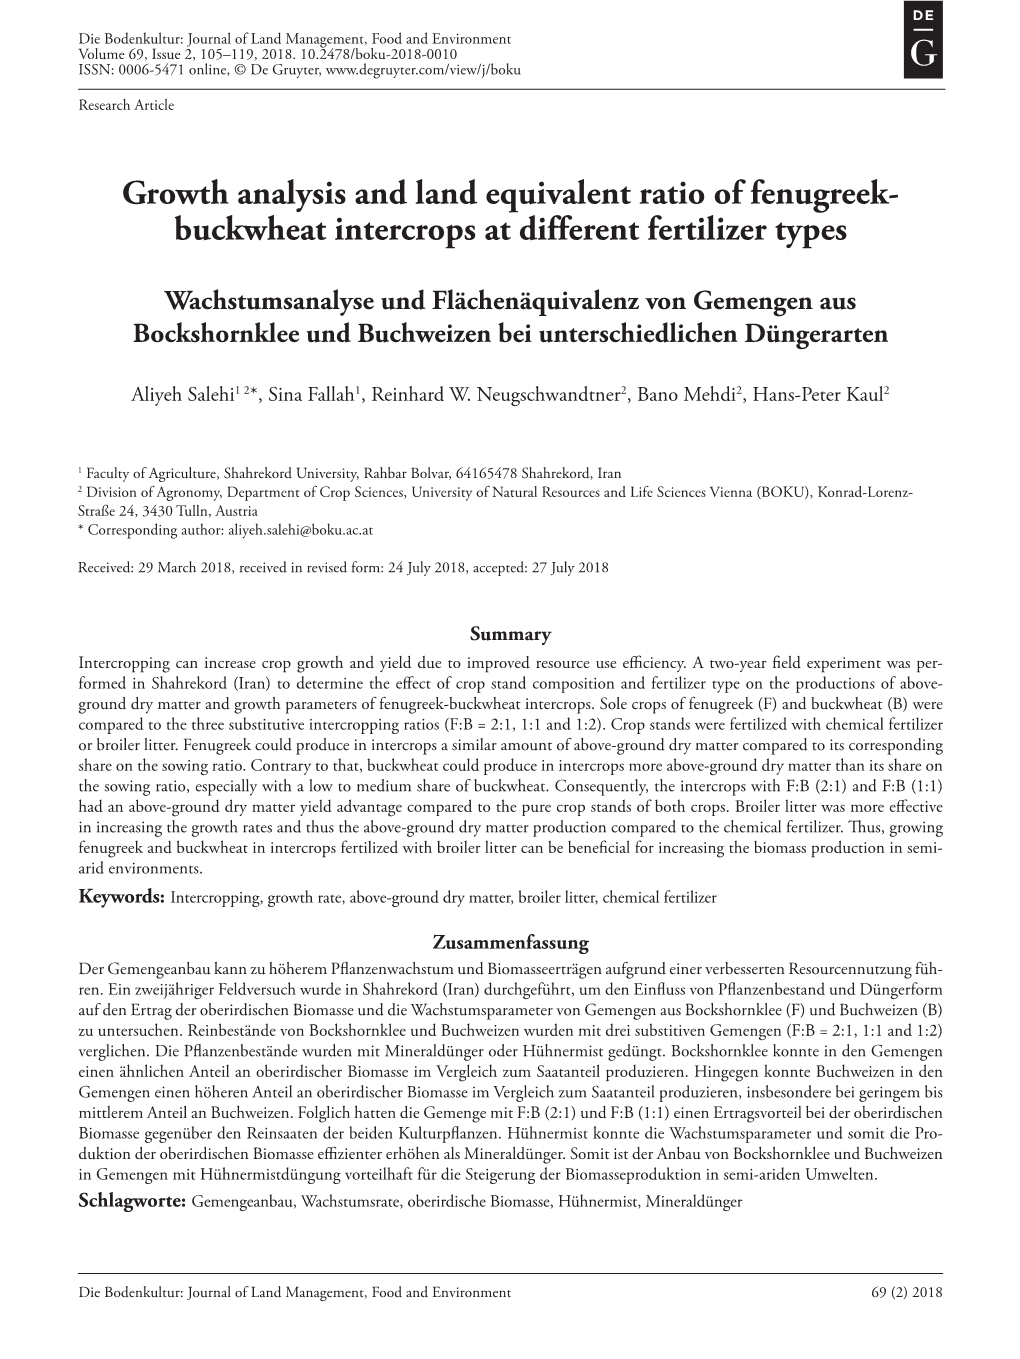 Growth Analysis and Land Equivalent Ratio of Fenugreek- Buckwheat Intercrops at Different Fertilizer Types